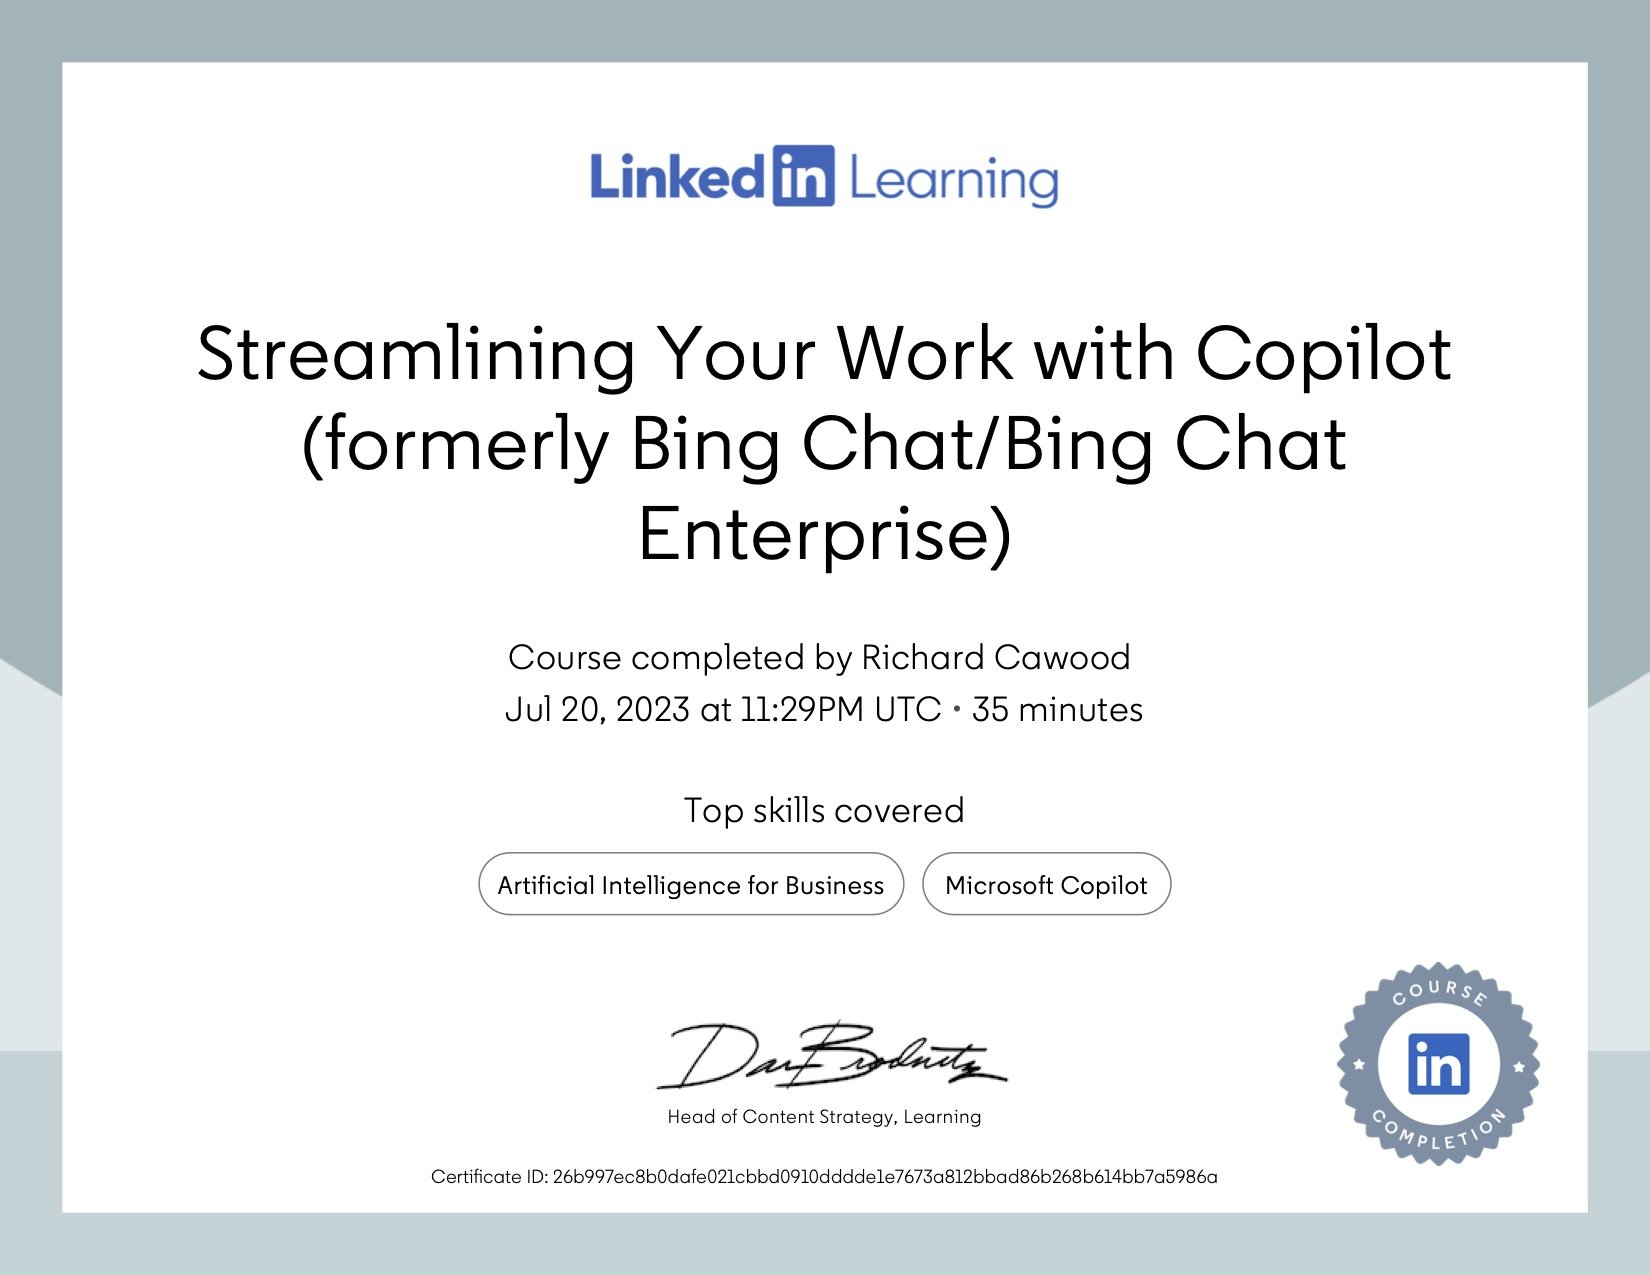 CertificateOfCompletion_Streamlining Your Work with Copilot formerly Bing ChatBing Chat Enterprise.jpg